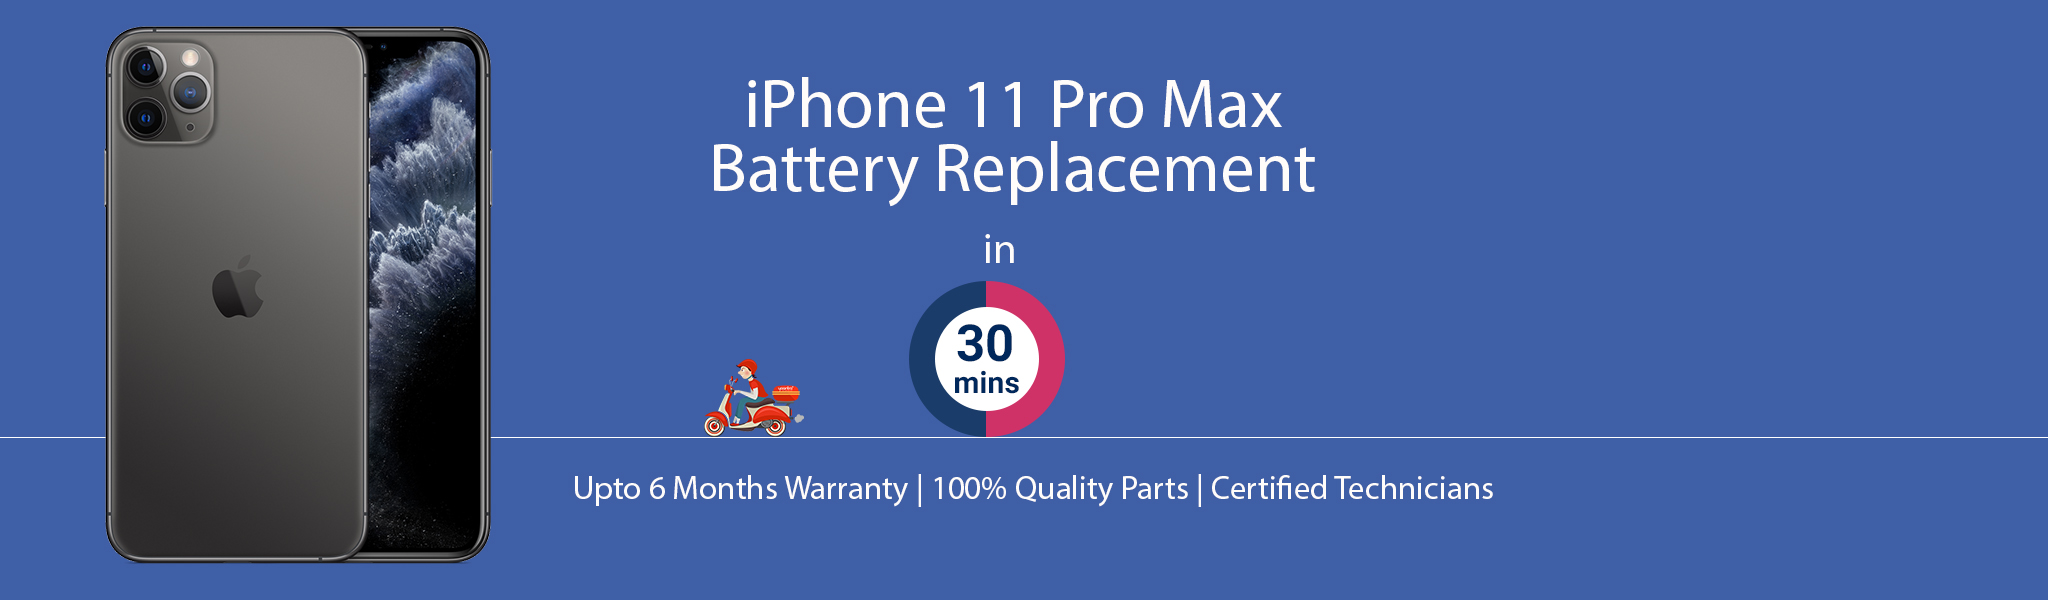 iphone-11-pro-max-battery-replacement.jpg